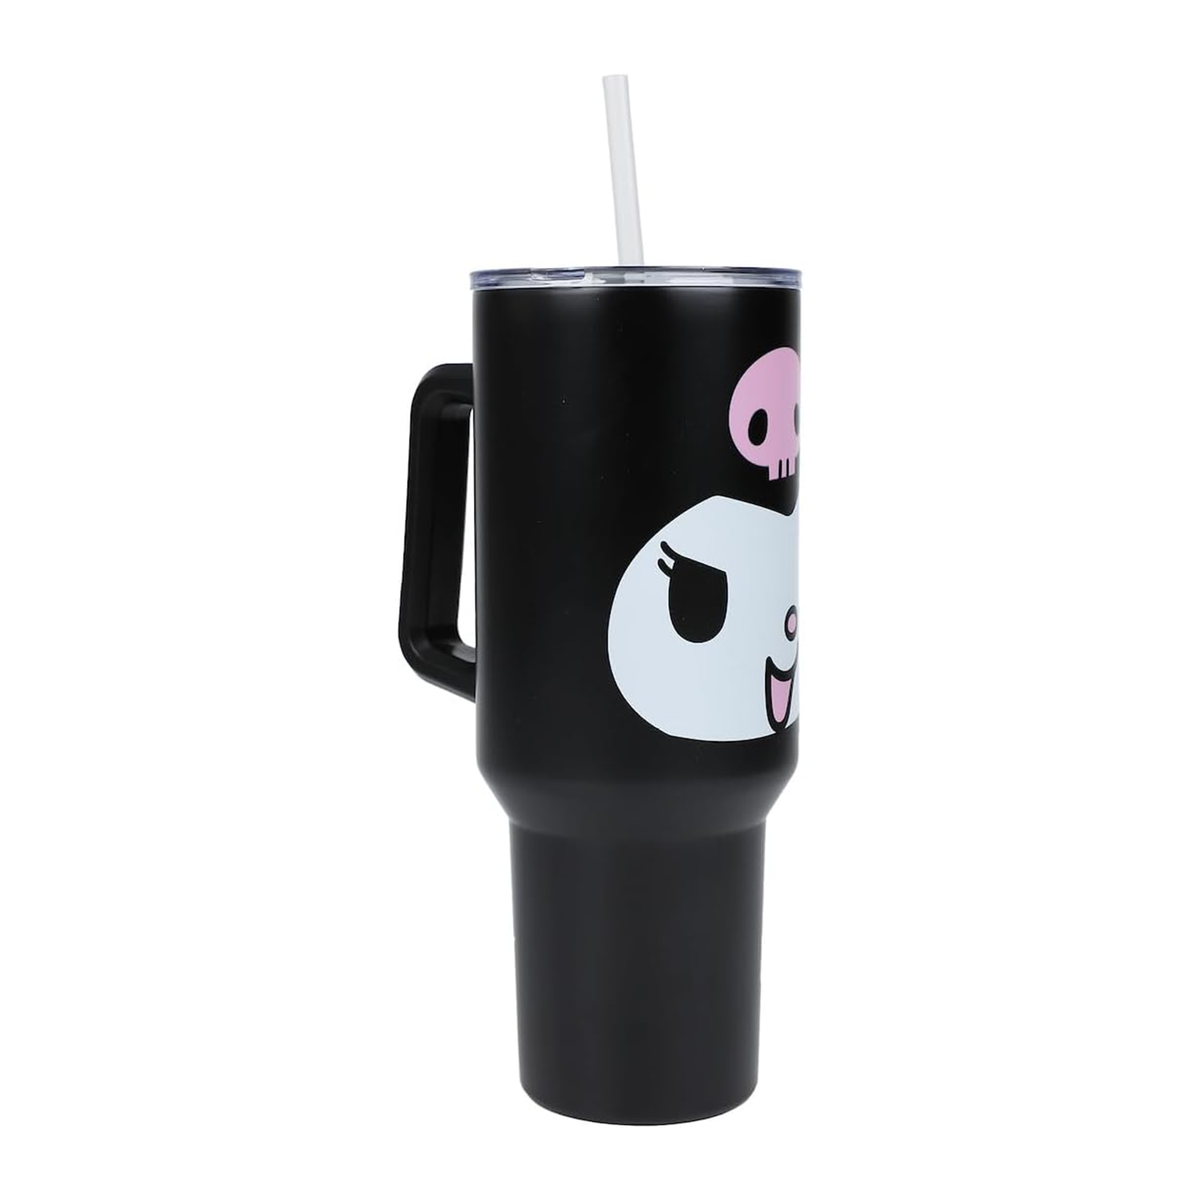 Hello Kitty 40oz. Tumbler with reusable straw, it can be